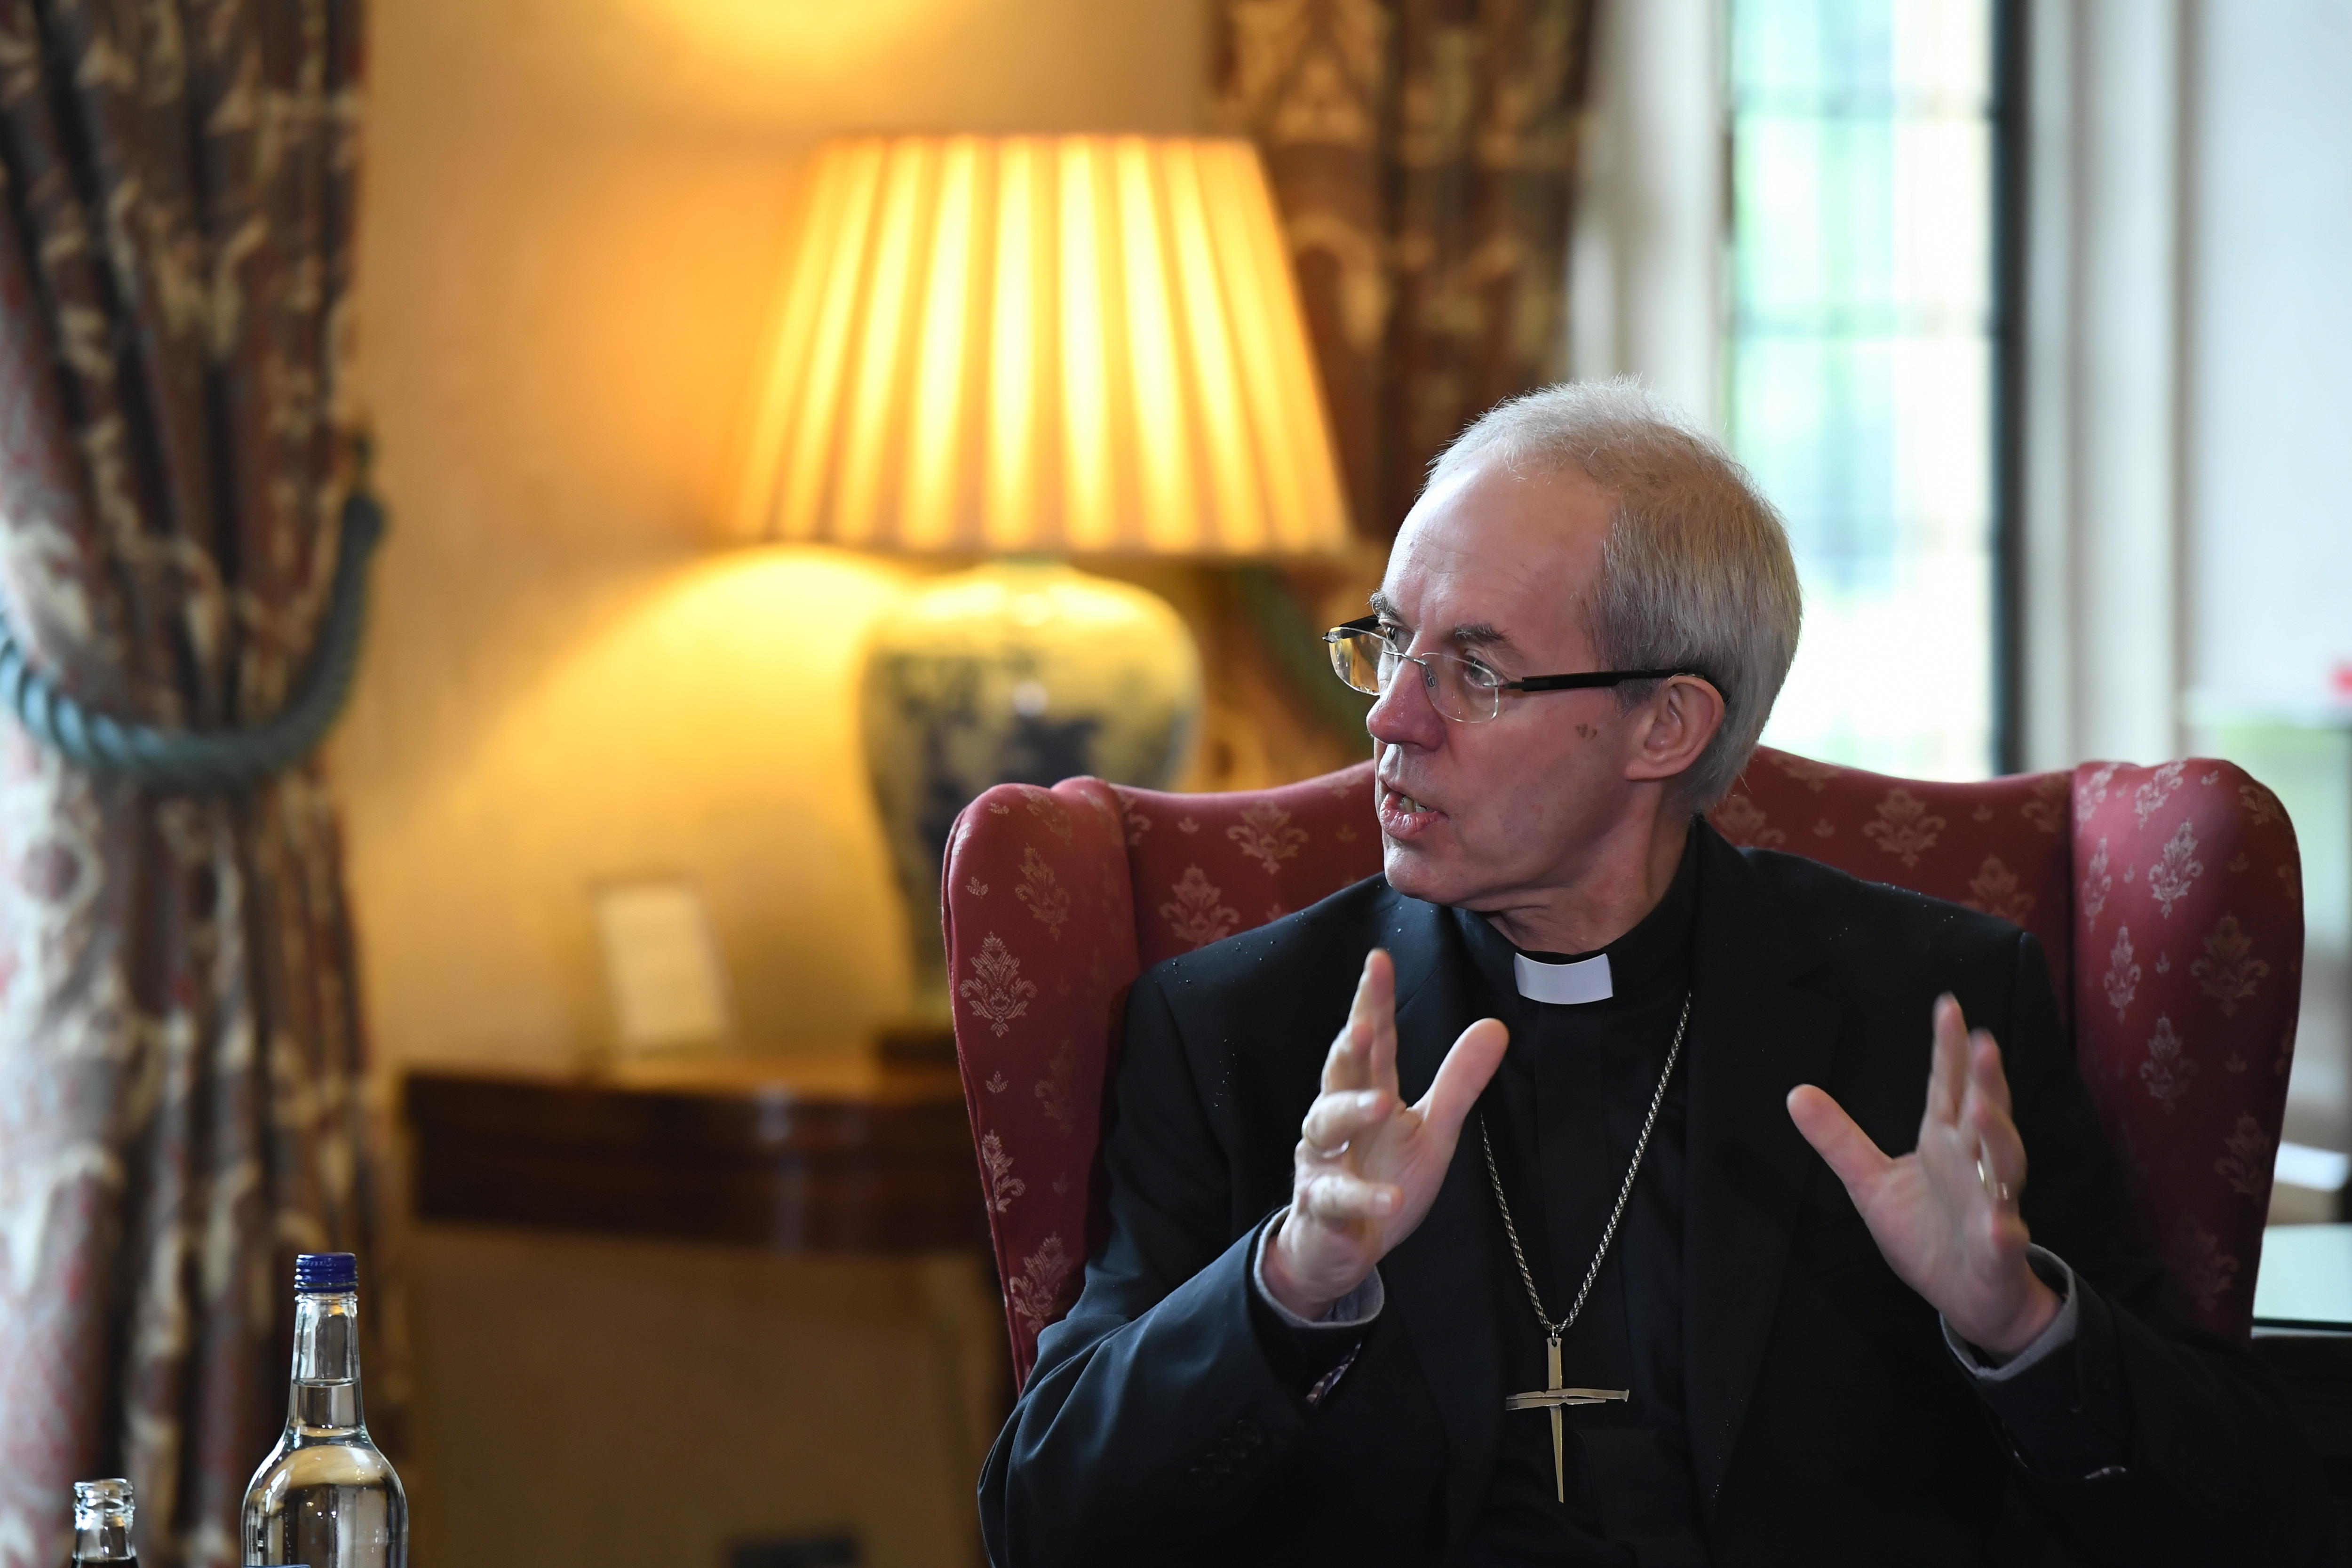 Archbishop of Canterbury named an influential progressive